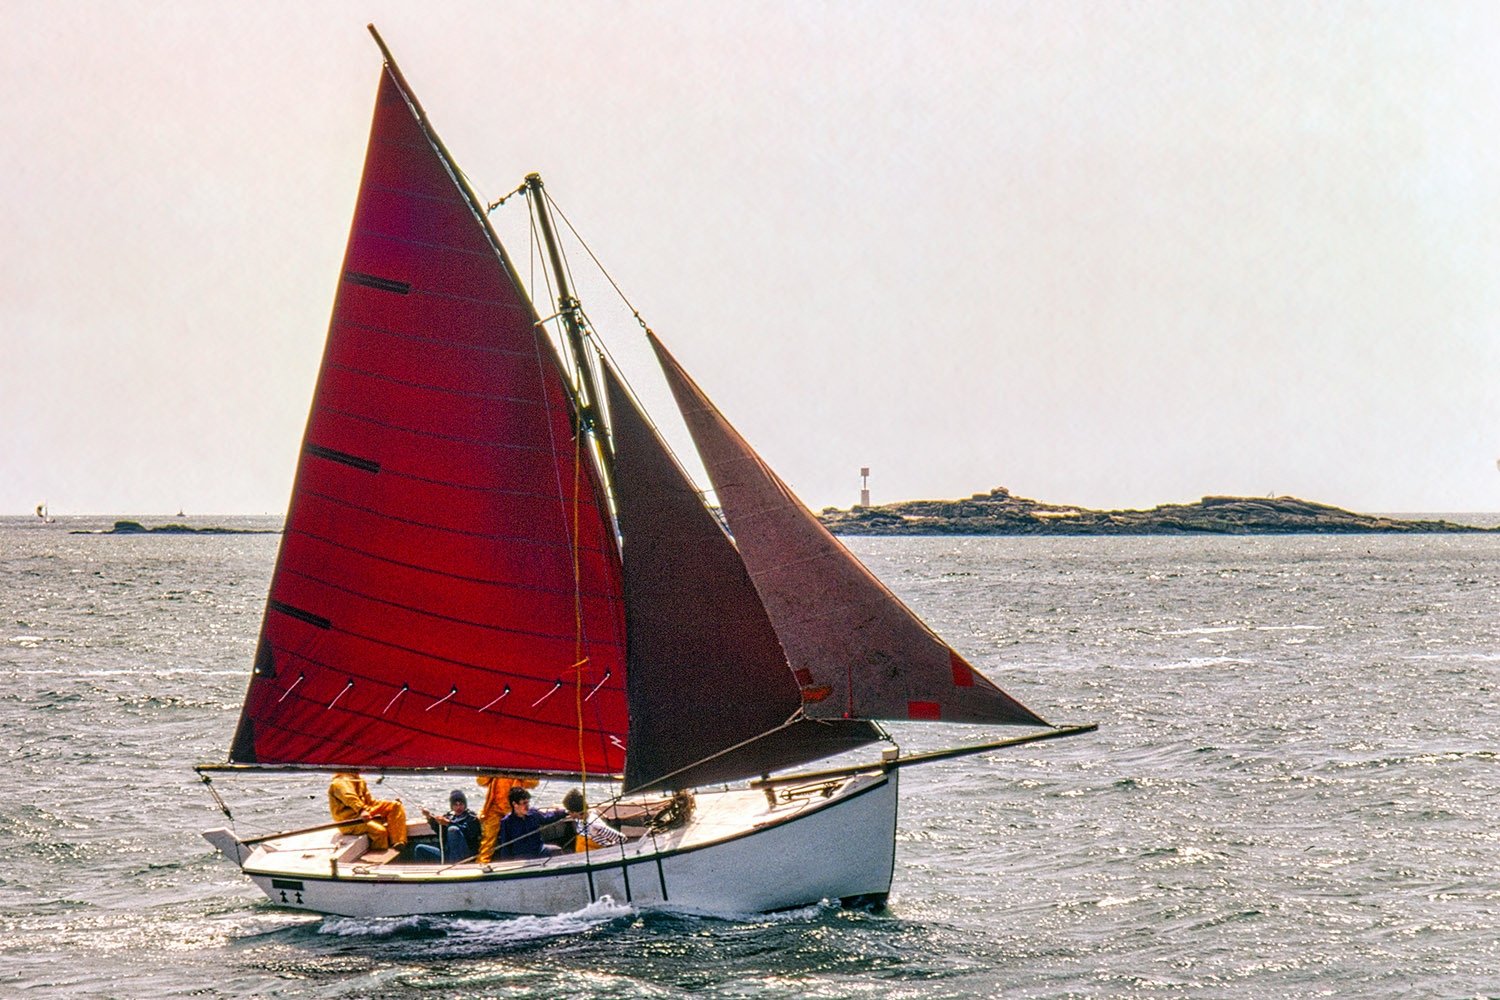 A sloop with a rust-colored main sail